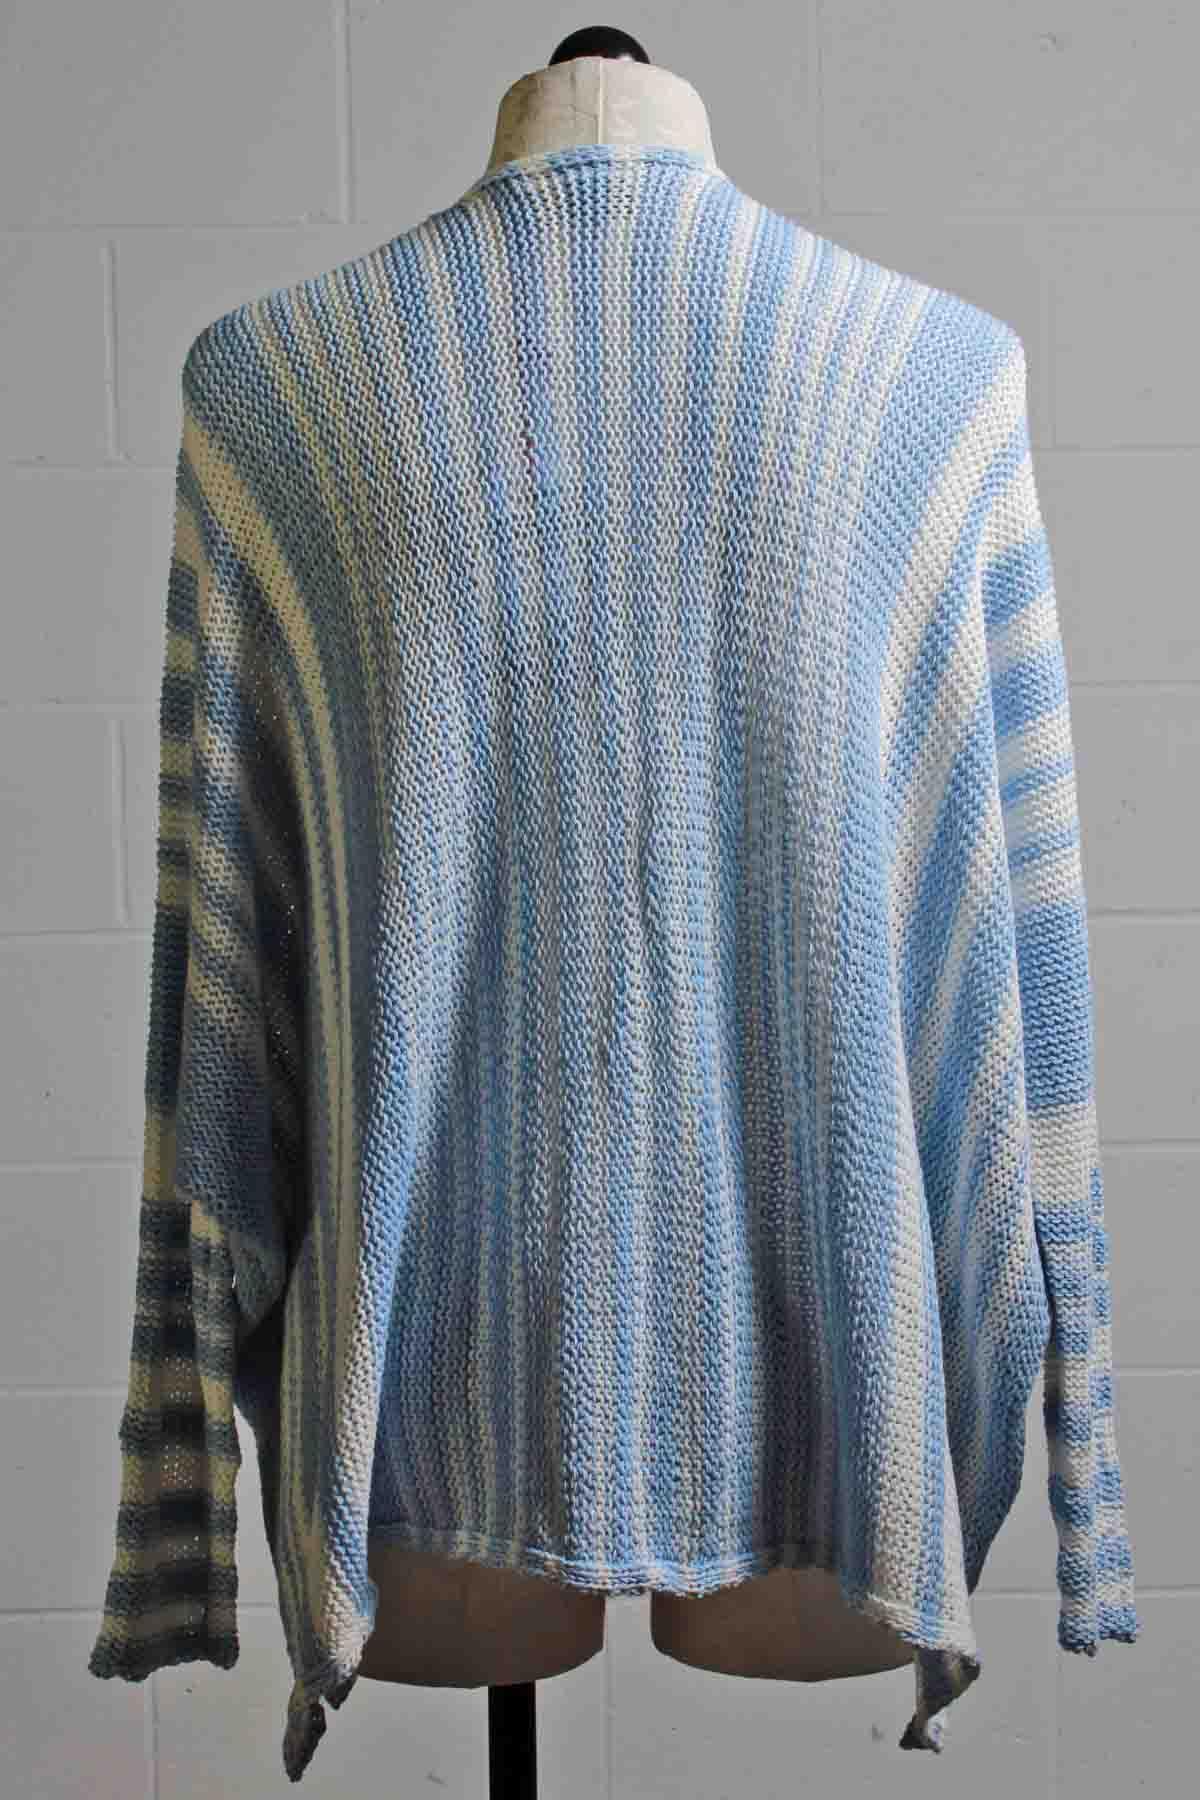 back view of V Neck Striped Beachcomber Sweater Top by Wooden Ships